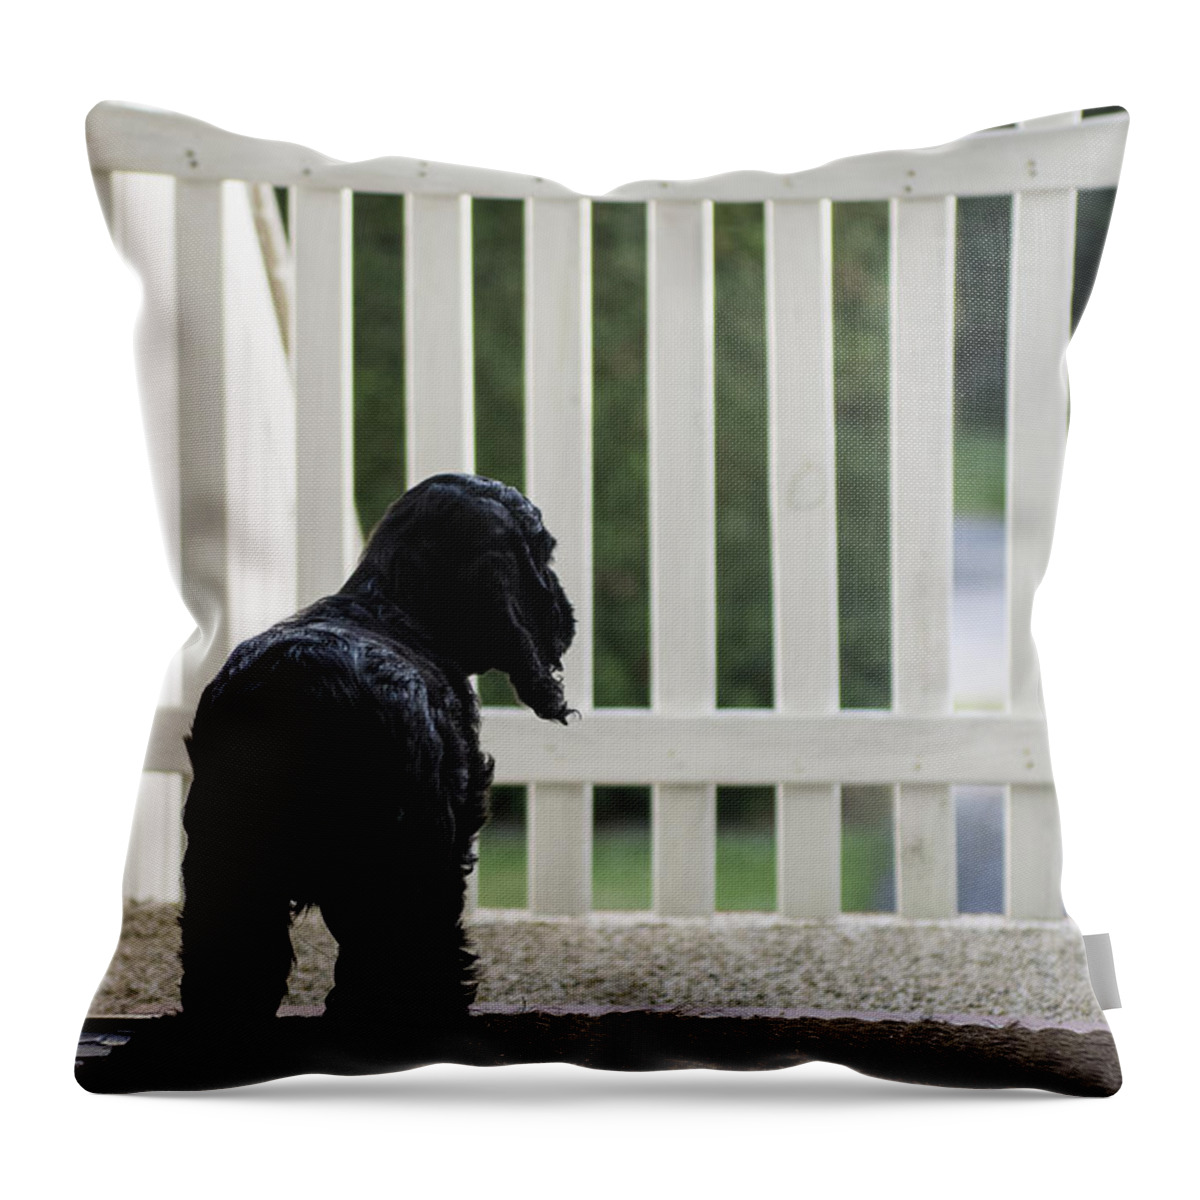 Puppy Throw Pillow featuring the photograph Waiting by Camilla Brattemark